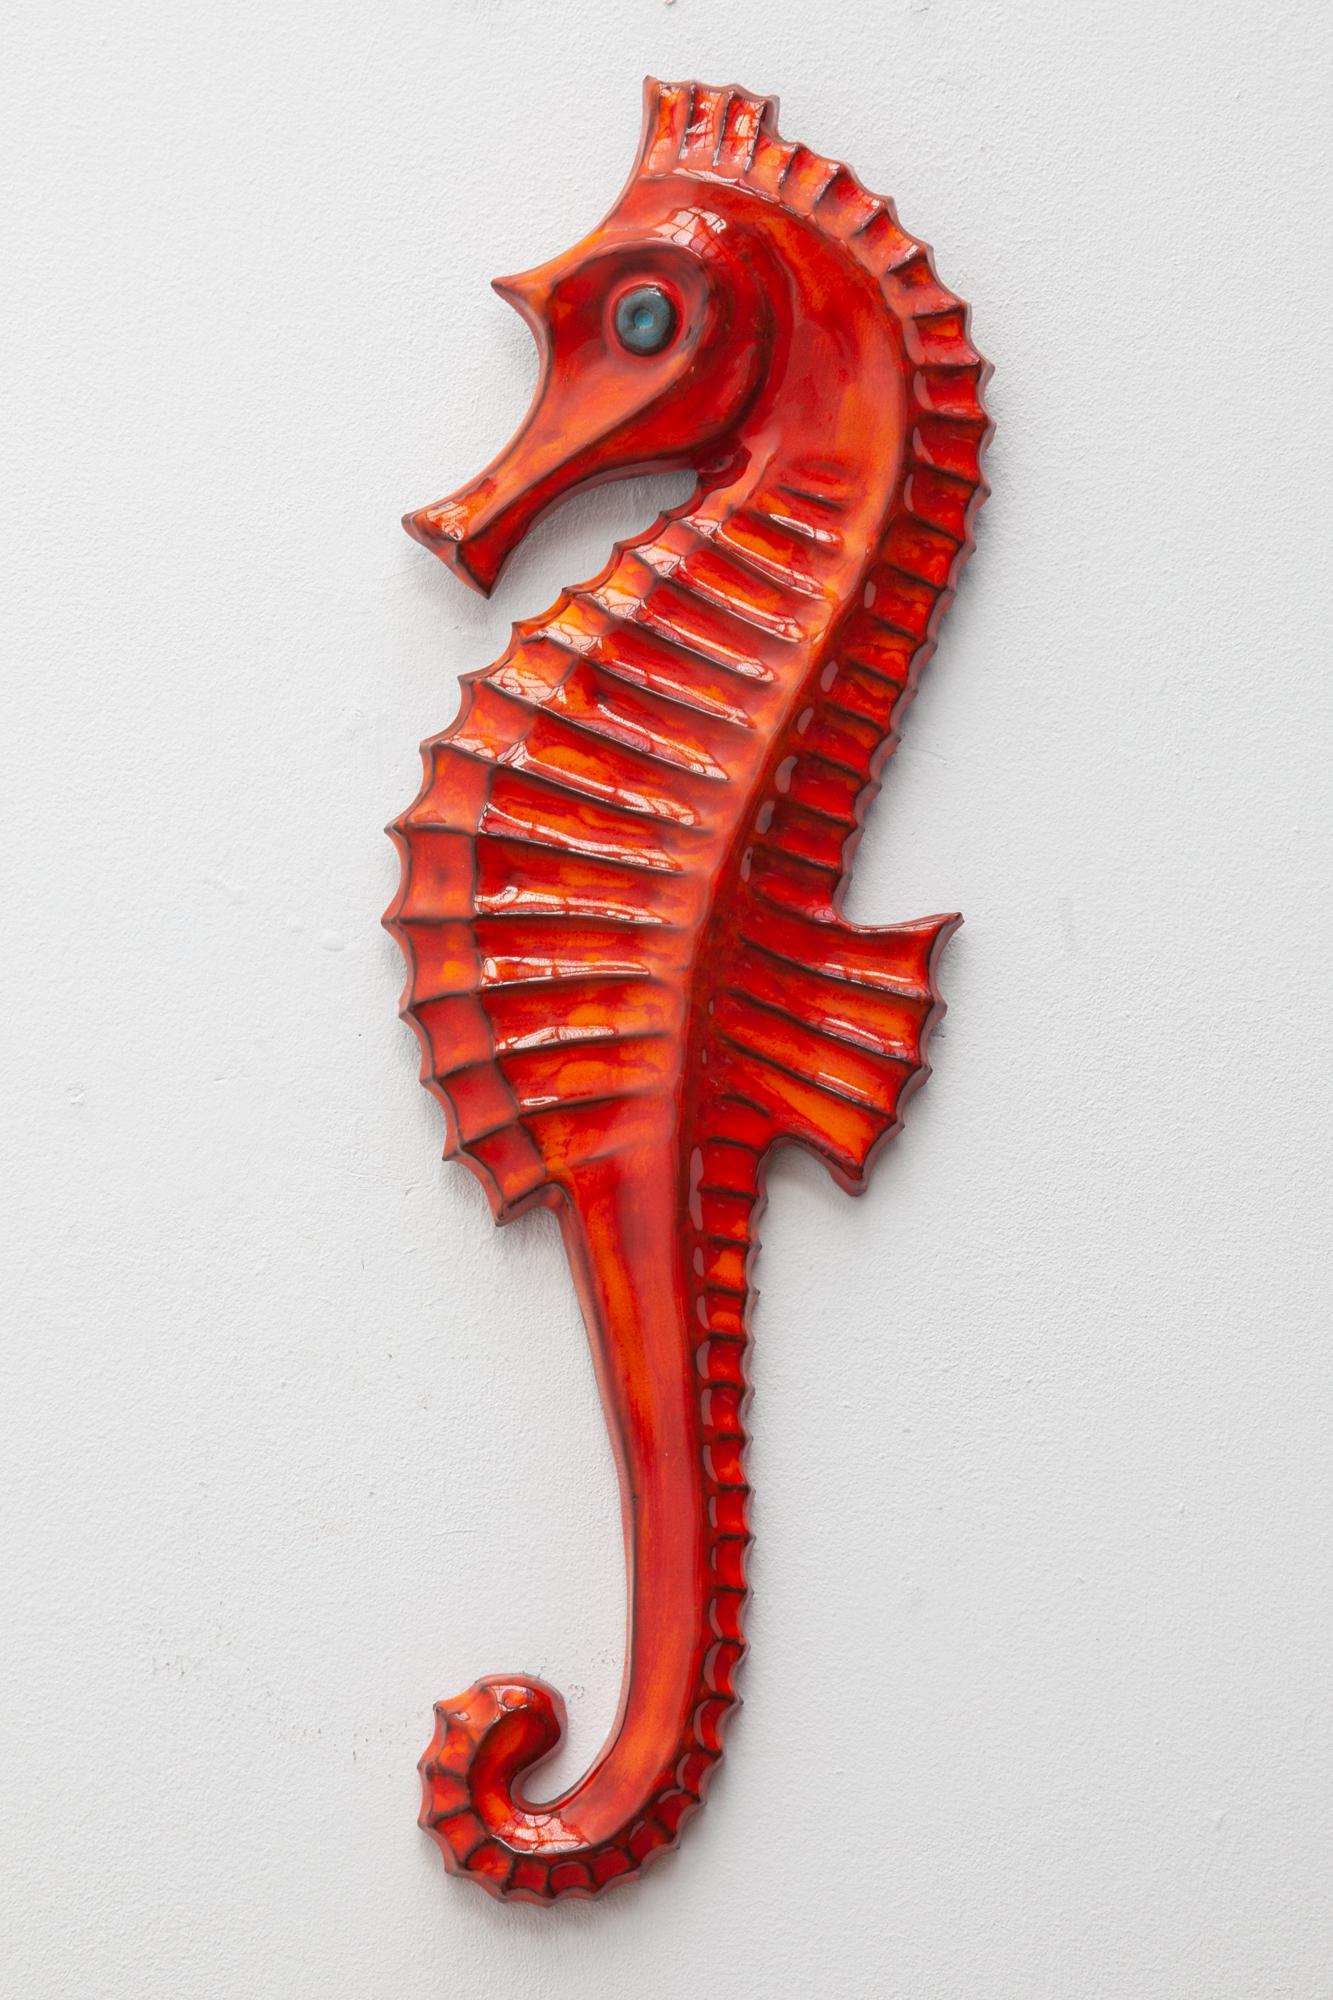 Belgian Seahorses Ceramic Wall Plaques Designed by F. Sanchez and Bayer, Belgium, 1960s